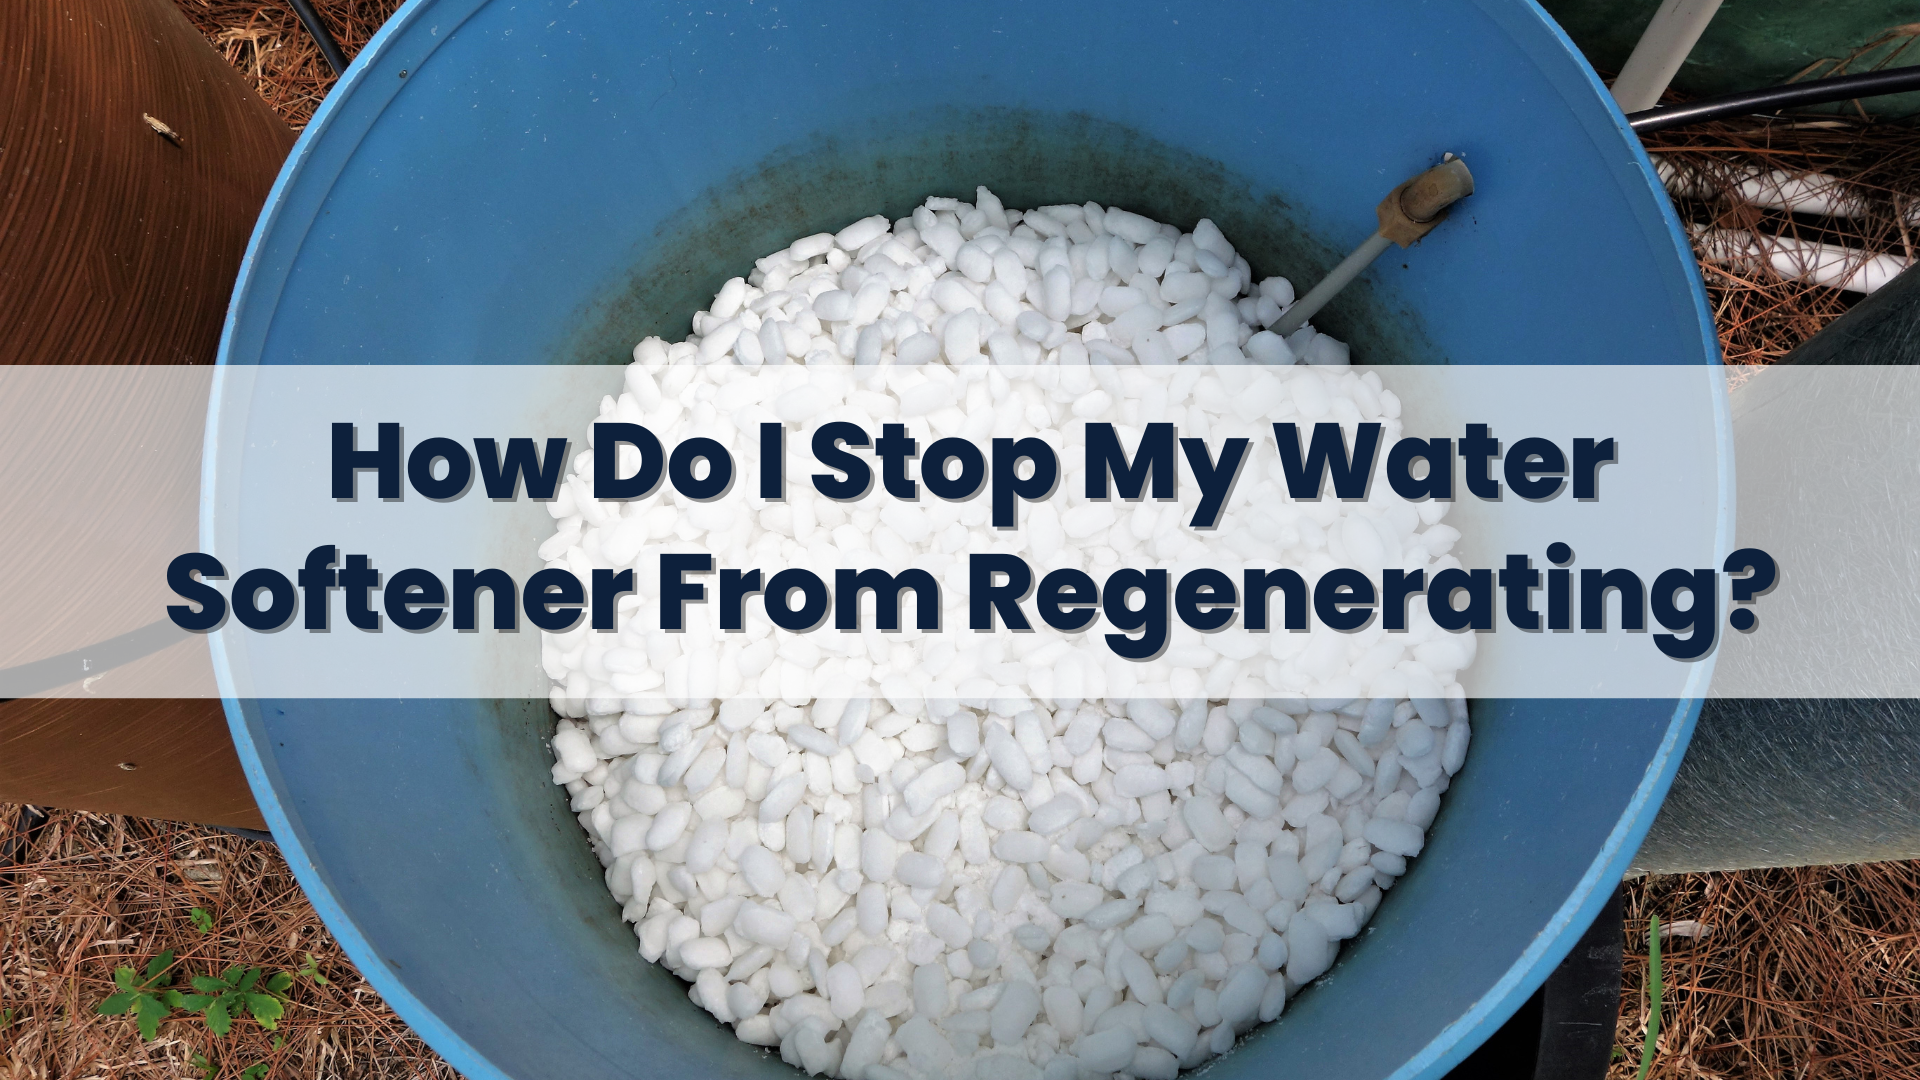 How Do I Stop My Water Softener From Regenerating